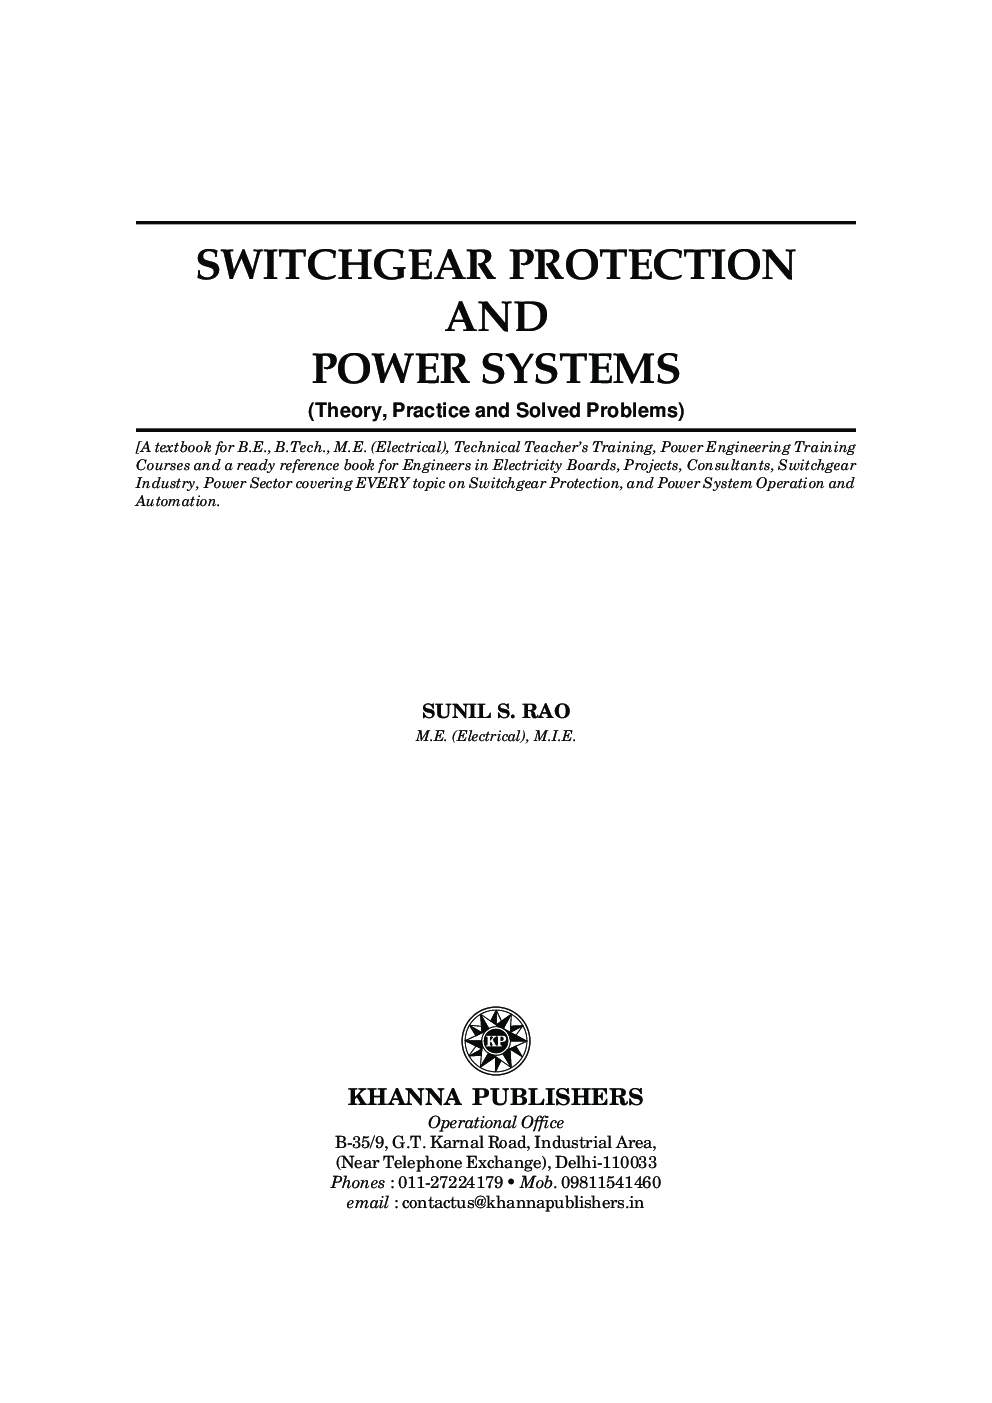 switchgear protection and power systems sunil s rao pdf free